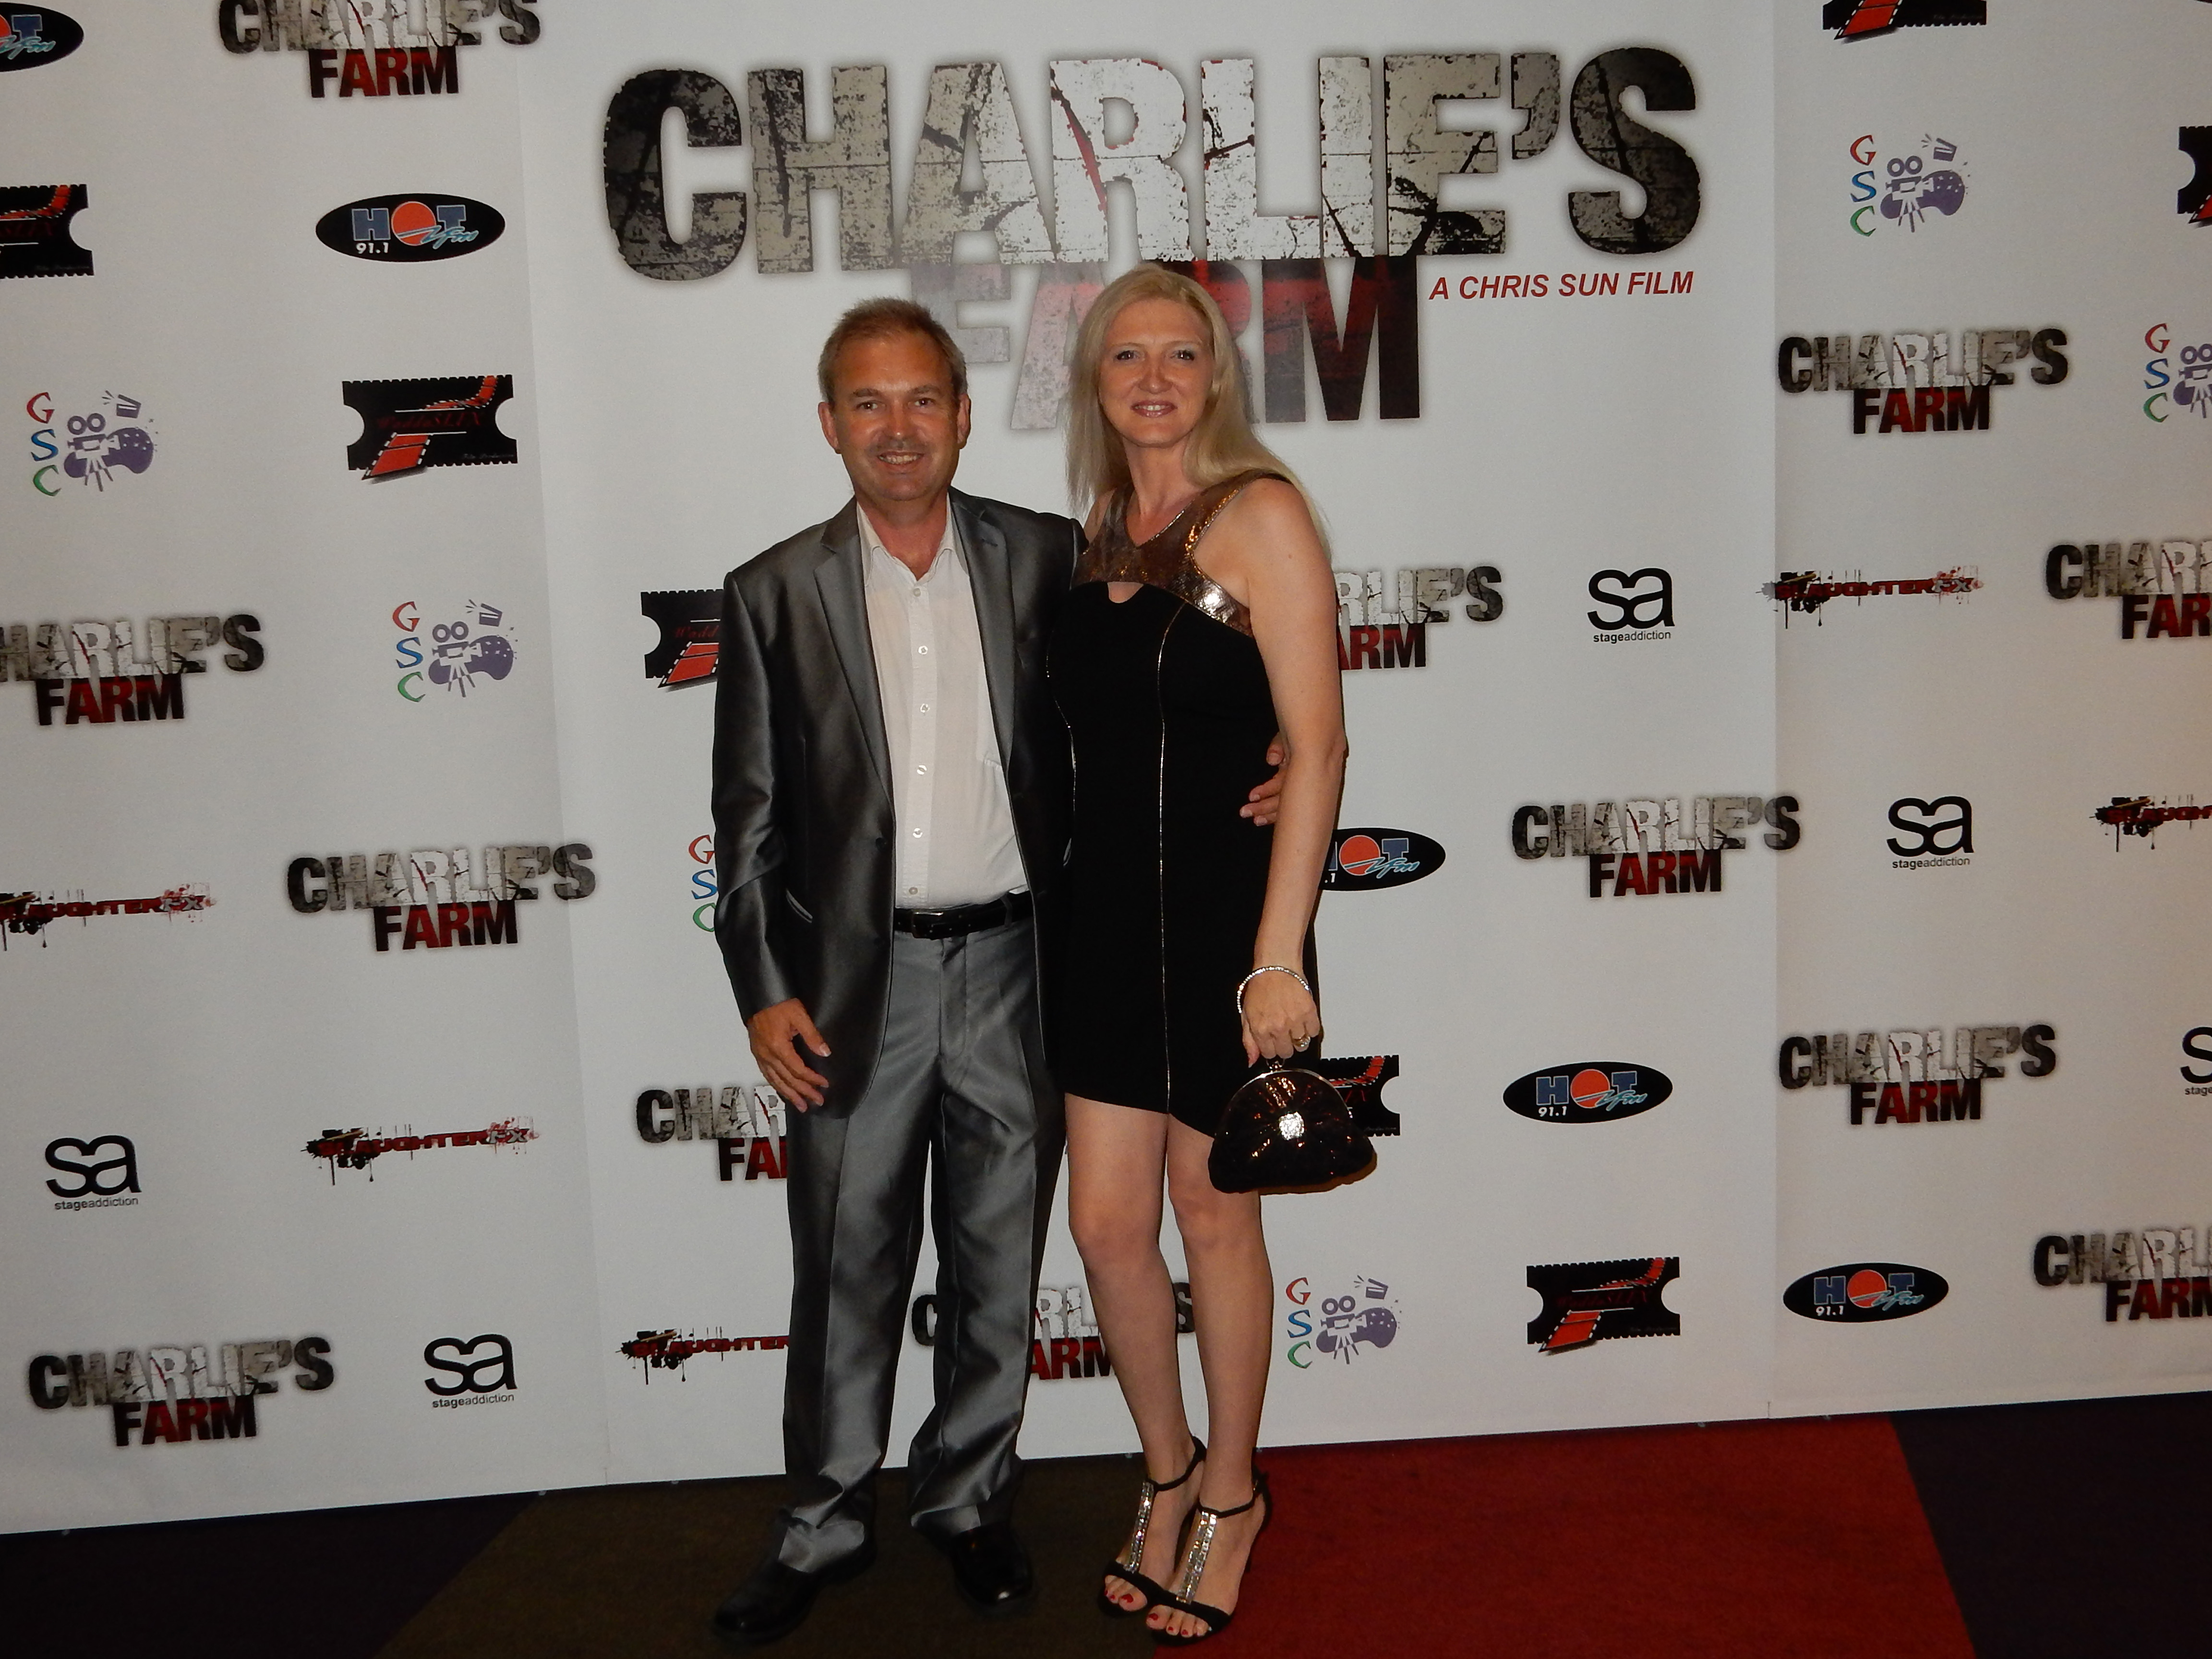 Michael Maguire and Toni McGhee at the premiere of 'Charlie's Farm'.